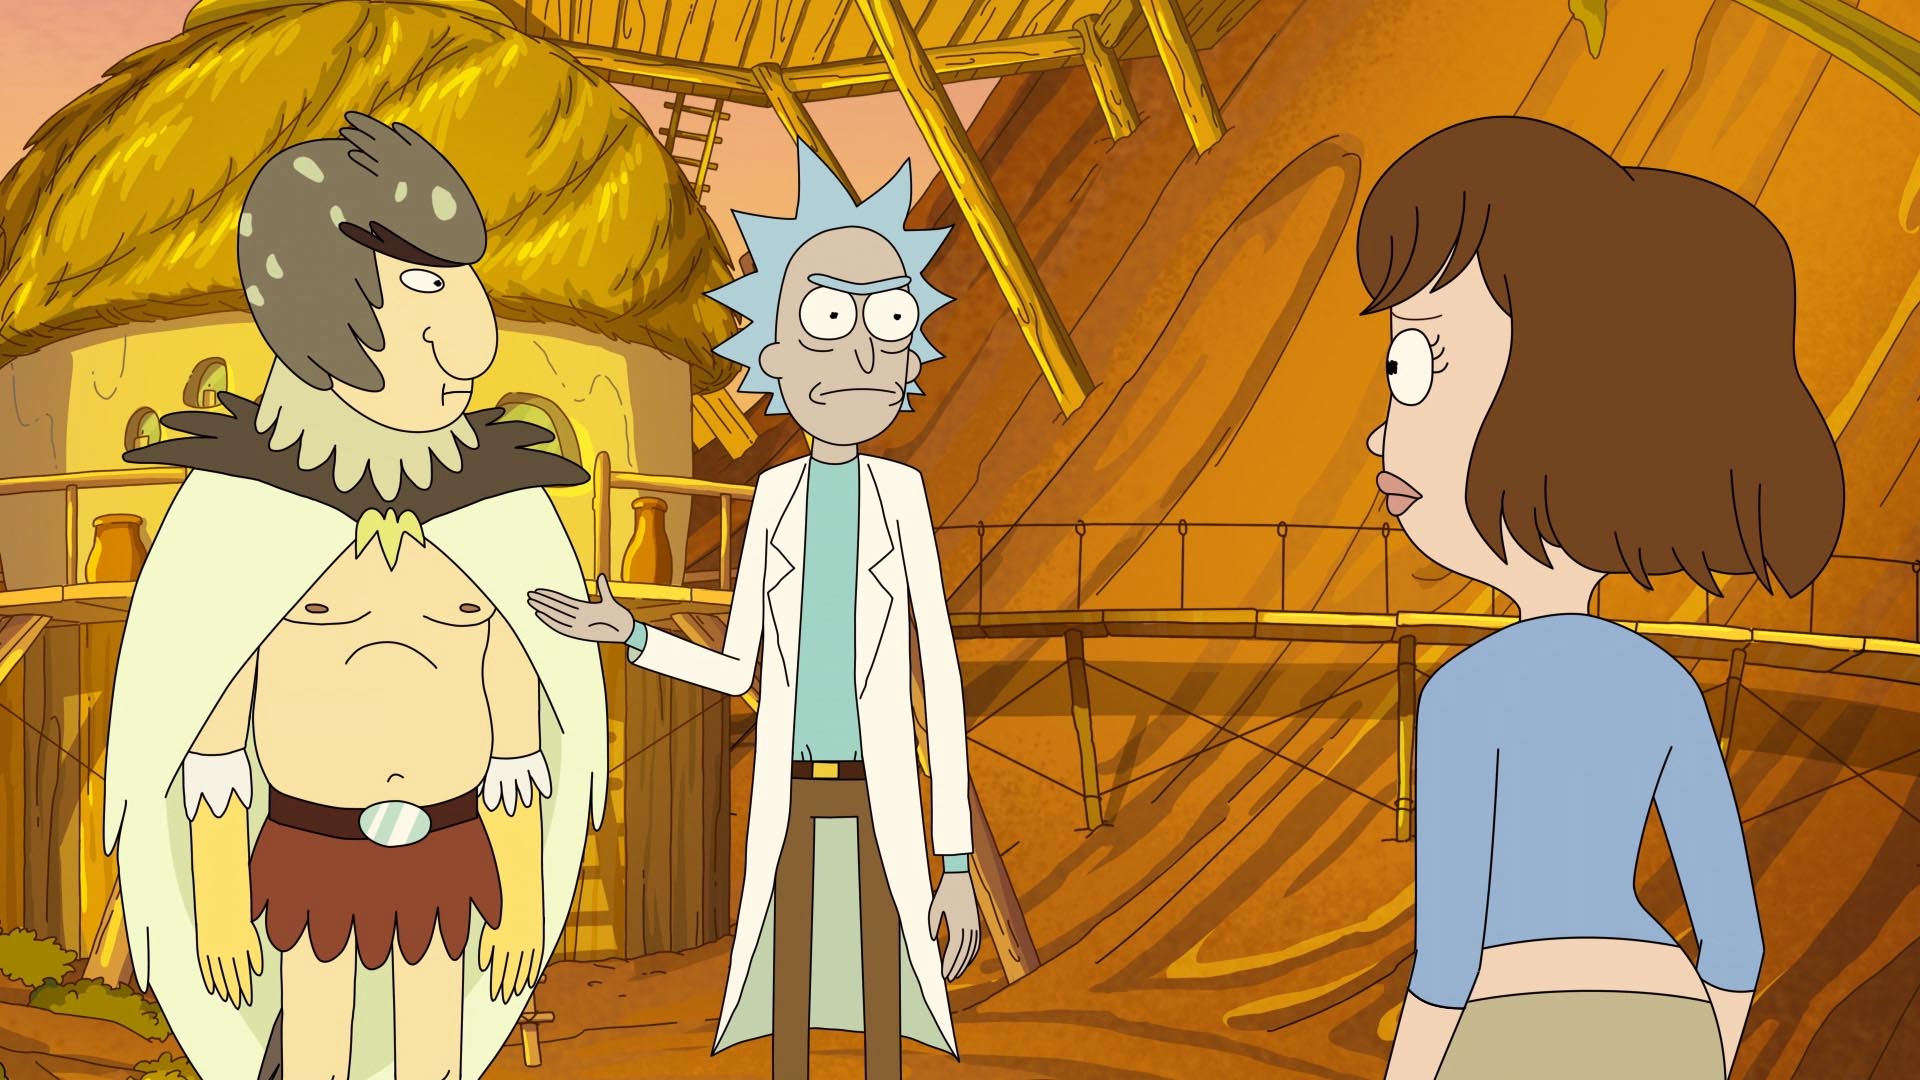 Rick and Morty season 6, episode 1 live stream: Watch online